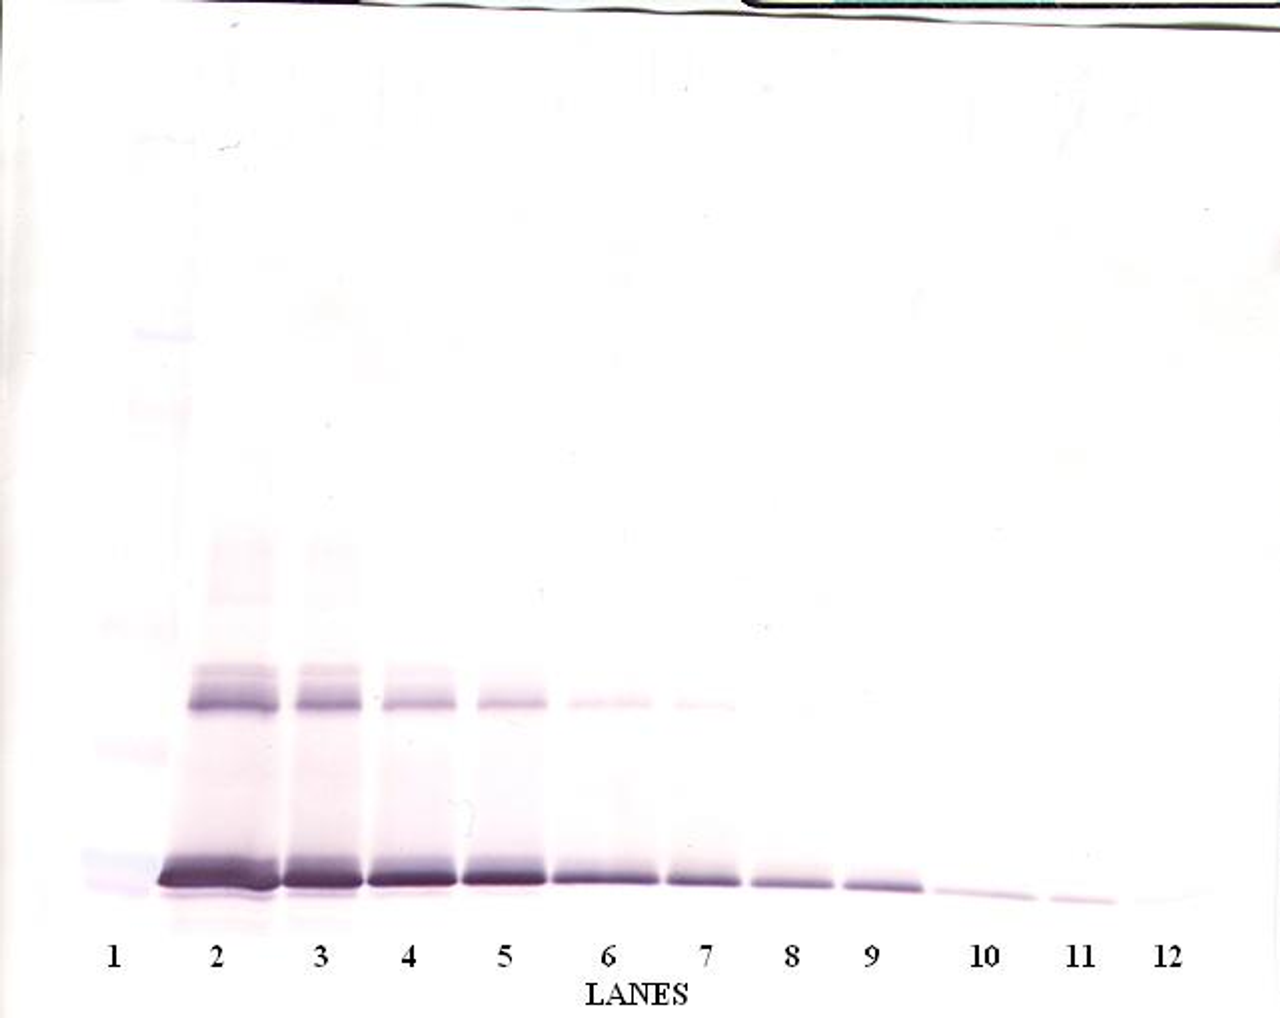 To detect Murine IL-6 by Western Blot analysis this antibody can be used at a concentration of 0.1-0.2 ug/ml. When used in conjunction with compatible secondary reagents, the detection limit for recombinant Murine IL-6 is 1.5-3.0 ng/lane, under either reducing or non-reducing conditions.